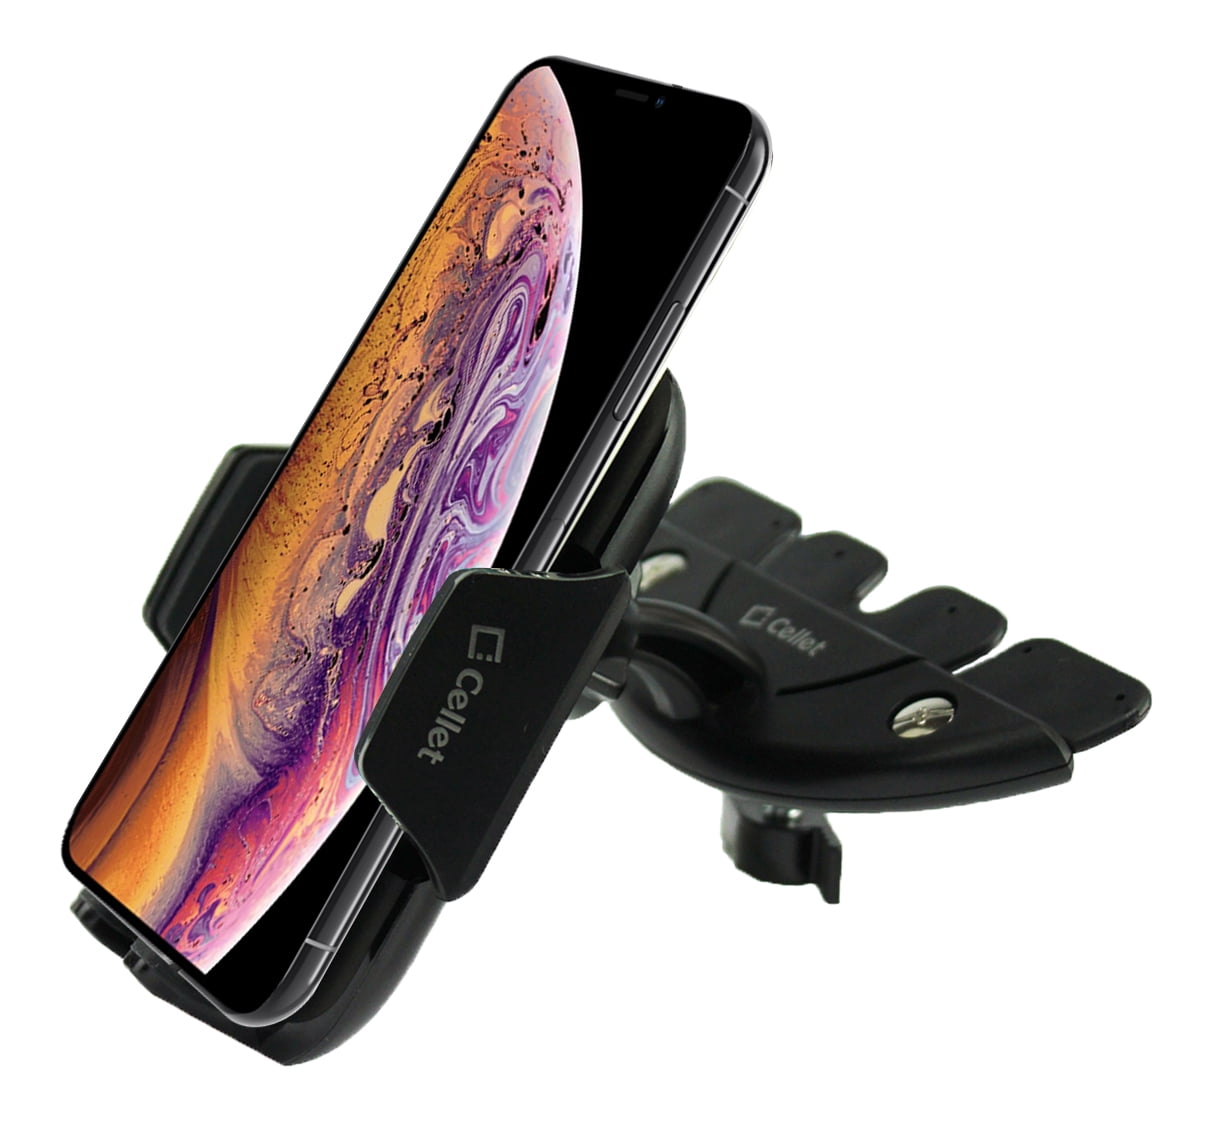 NEW CD Slot Car Mount Holder For iPhone X 7 6 Plus Galaxy S5 Note 4/3 GPS Black 